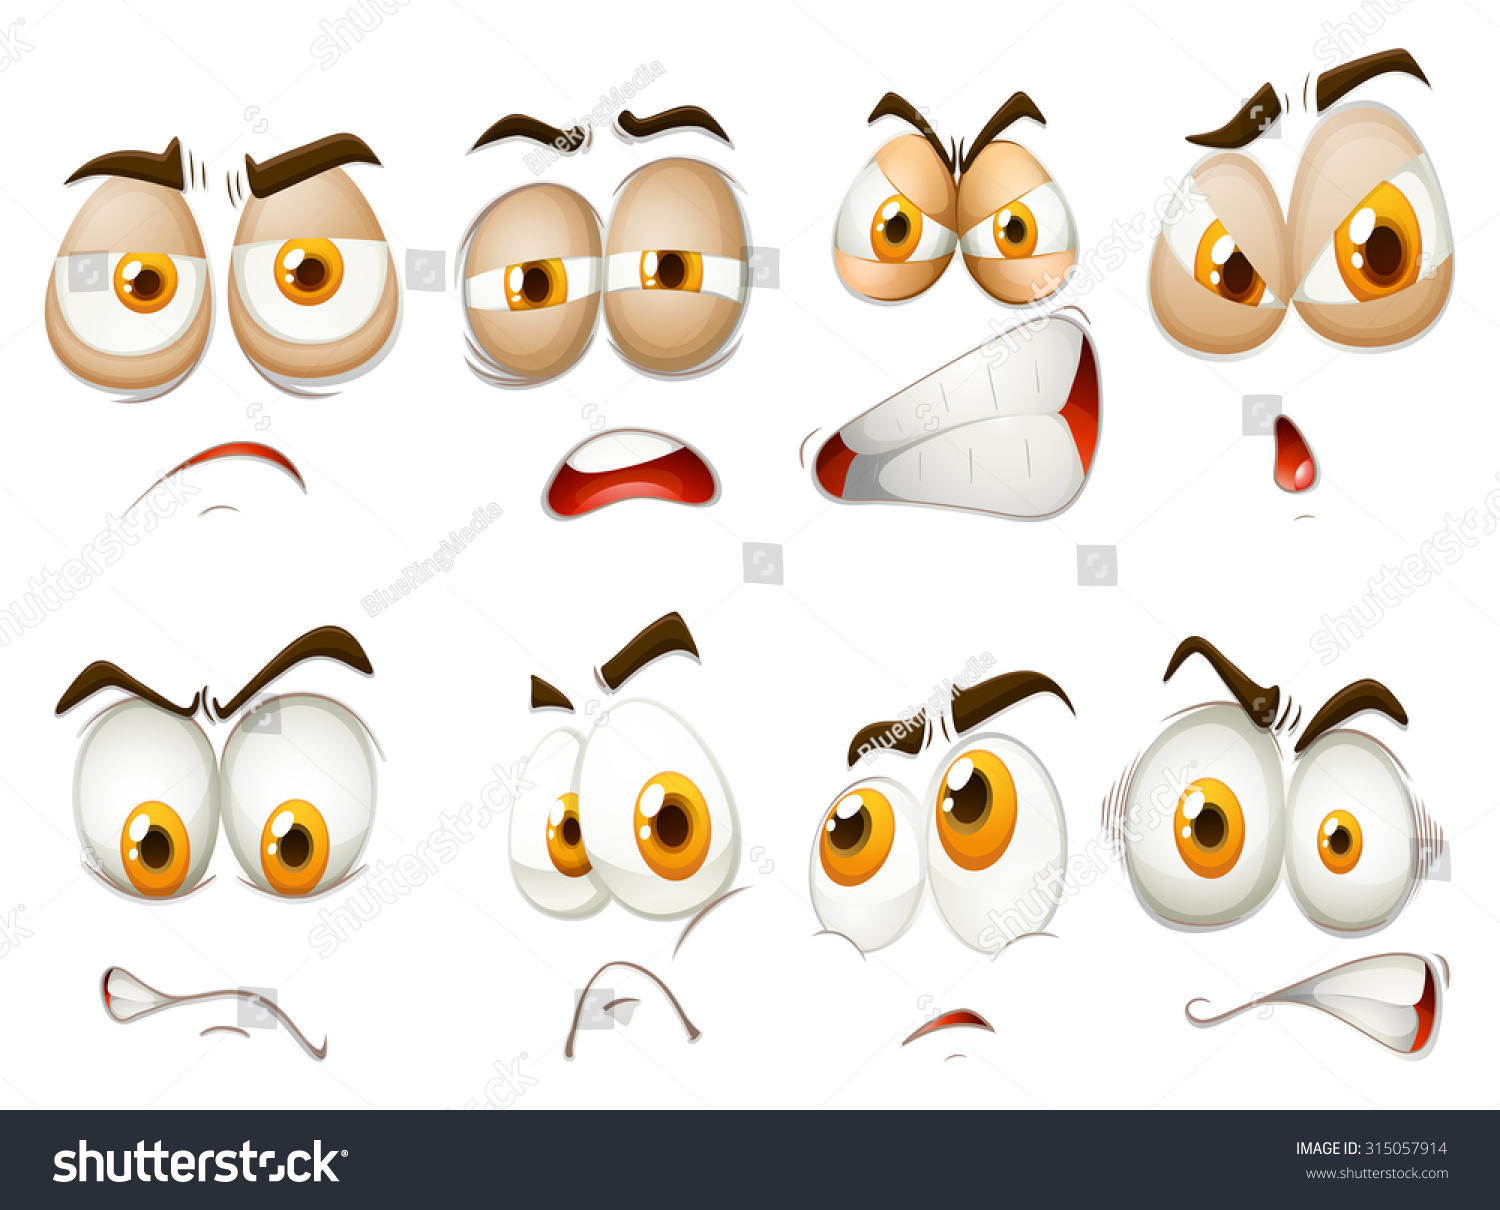 clipart human emotions - photo #17